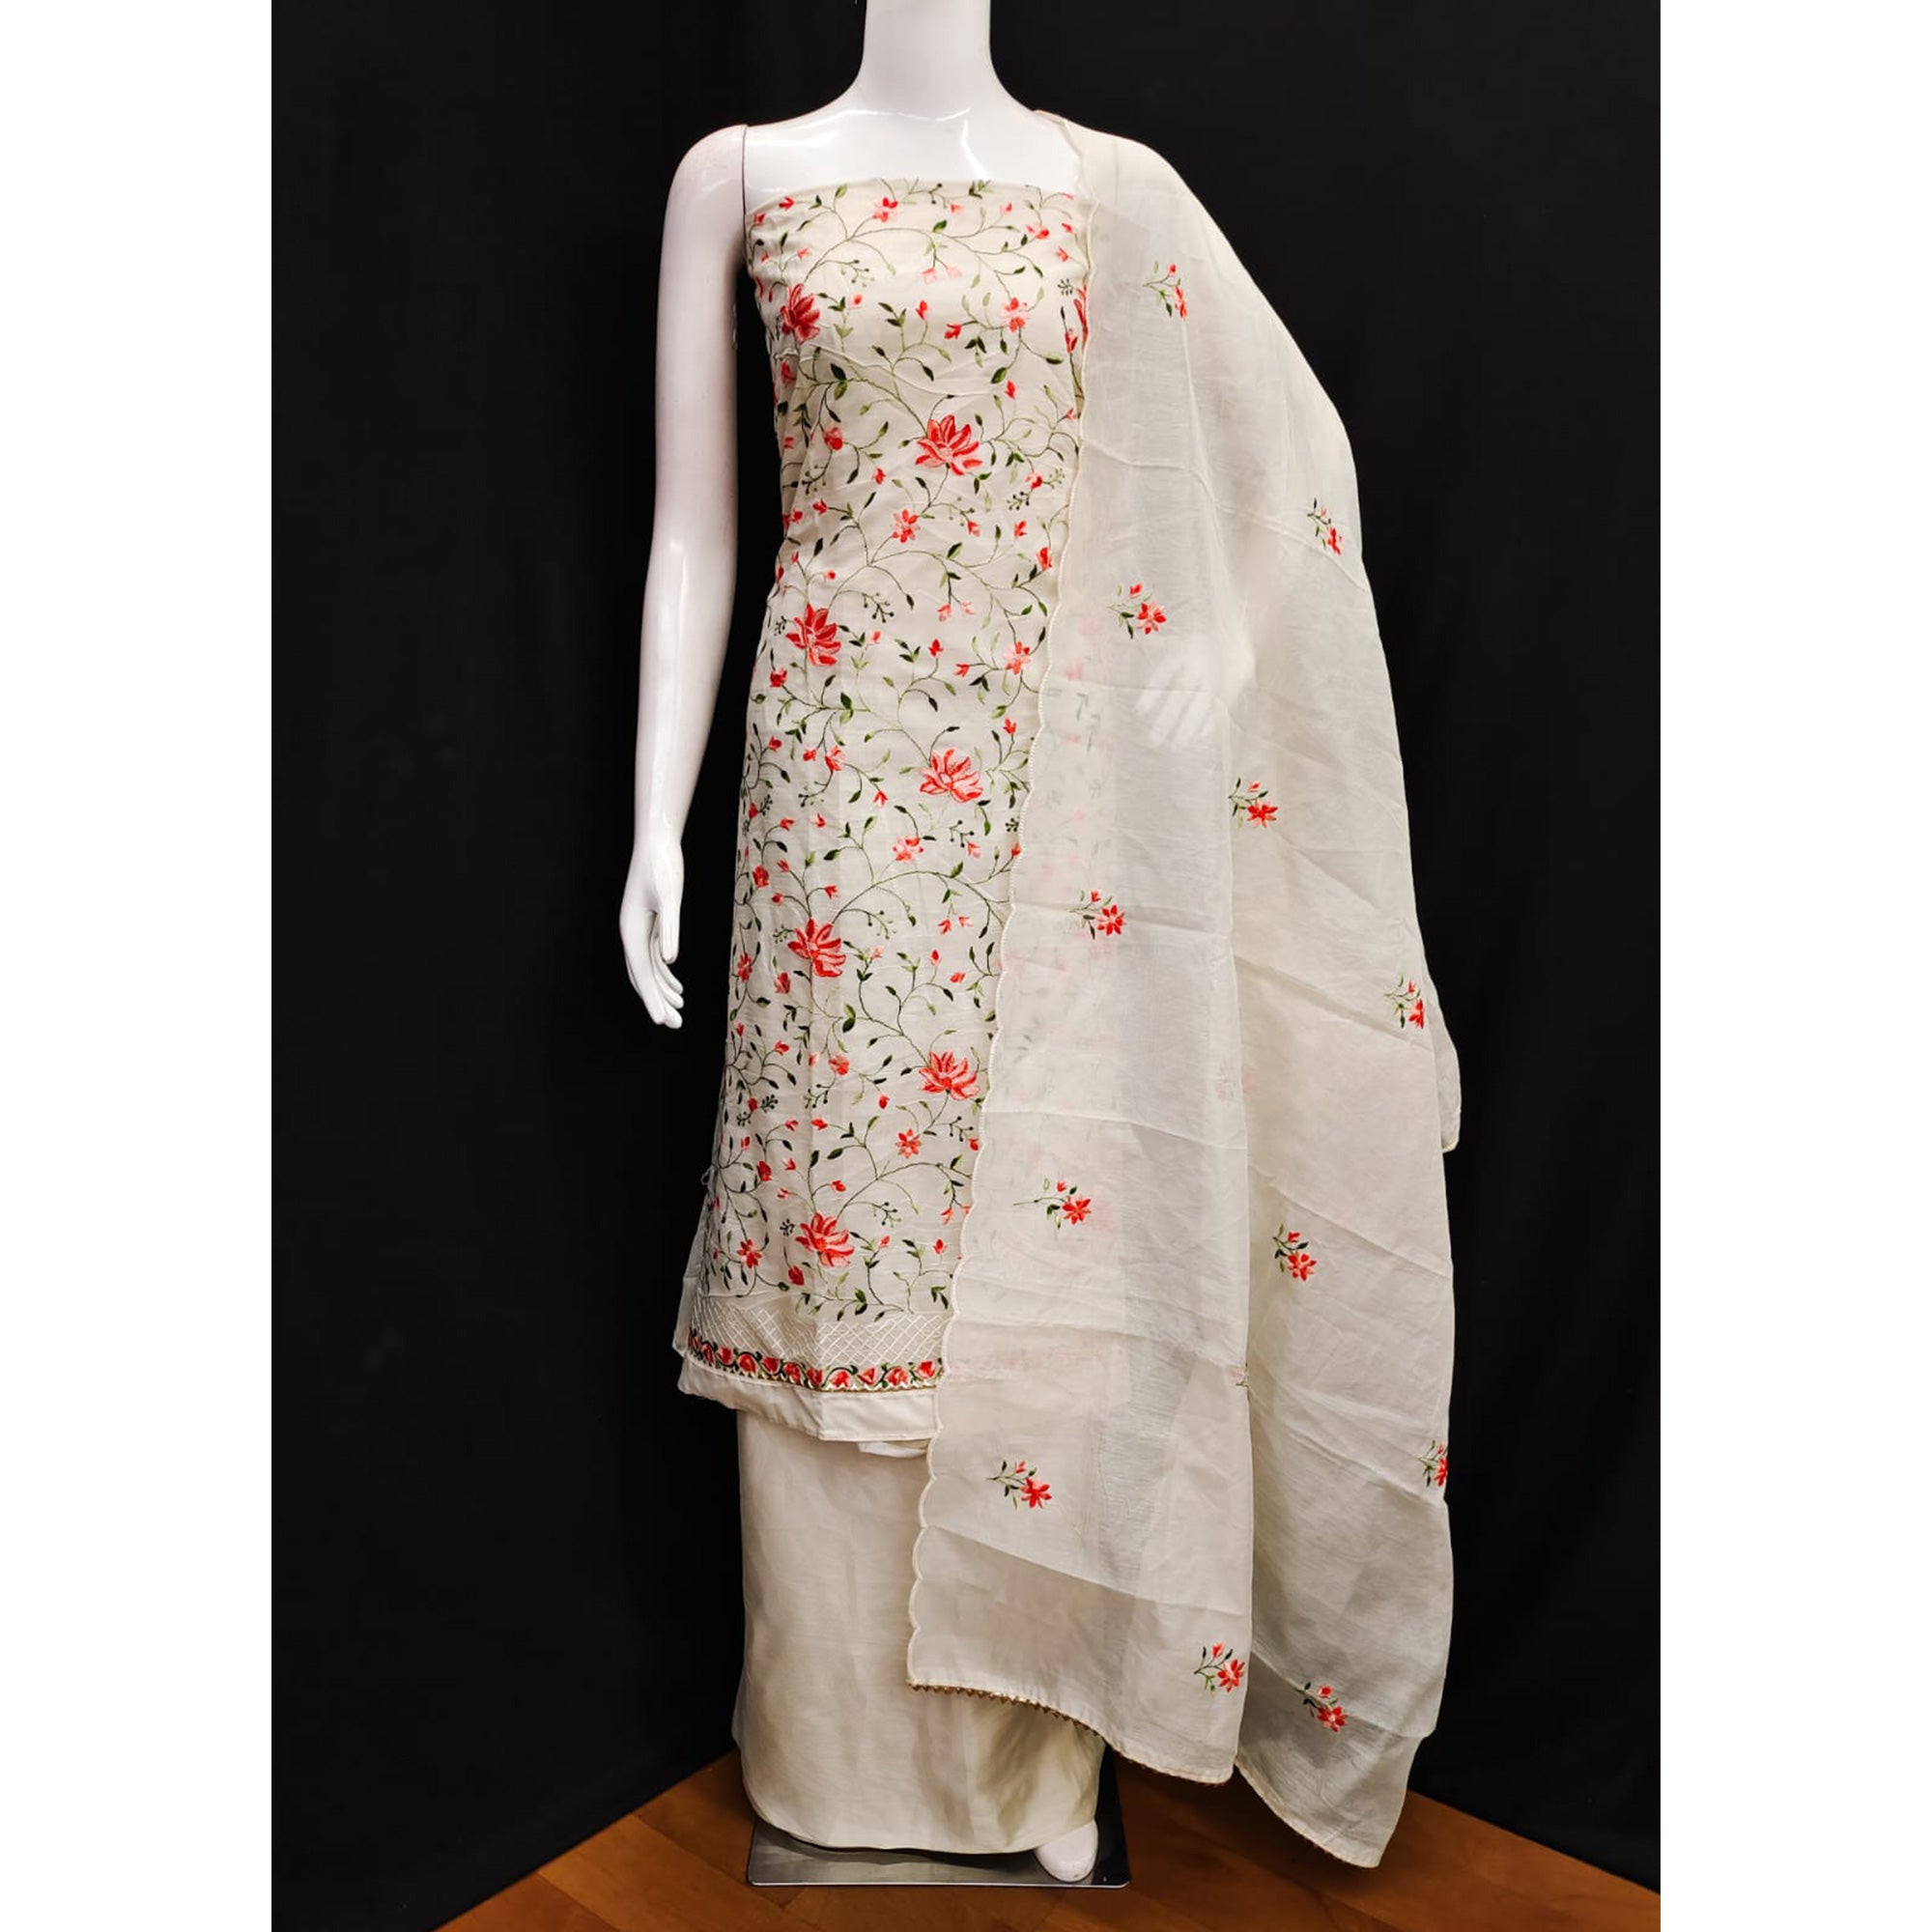 Off White & Orange Floral Embroidered Chanderi Silk Dress Material